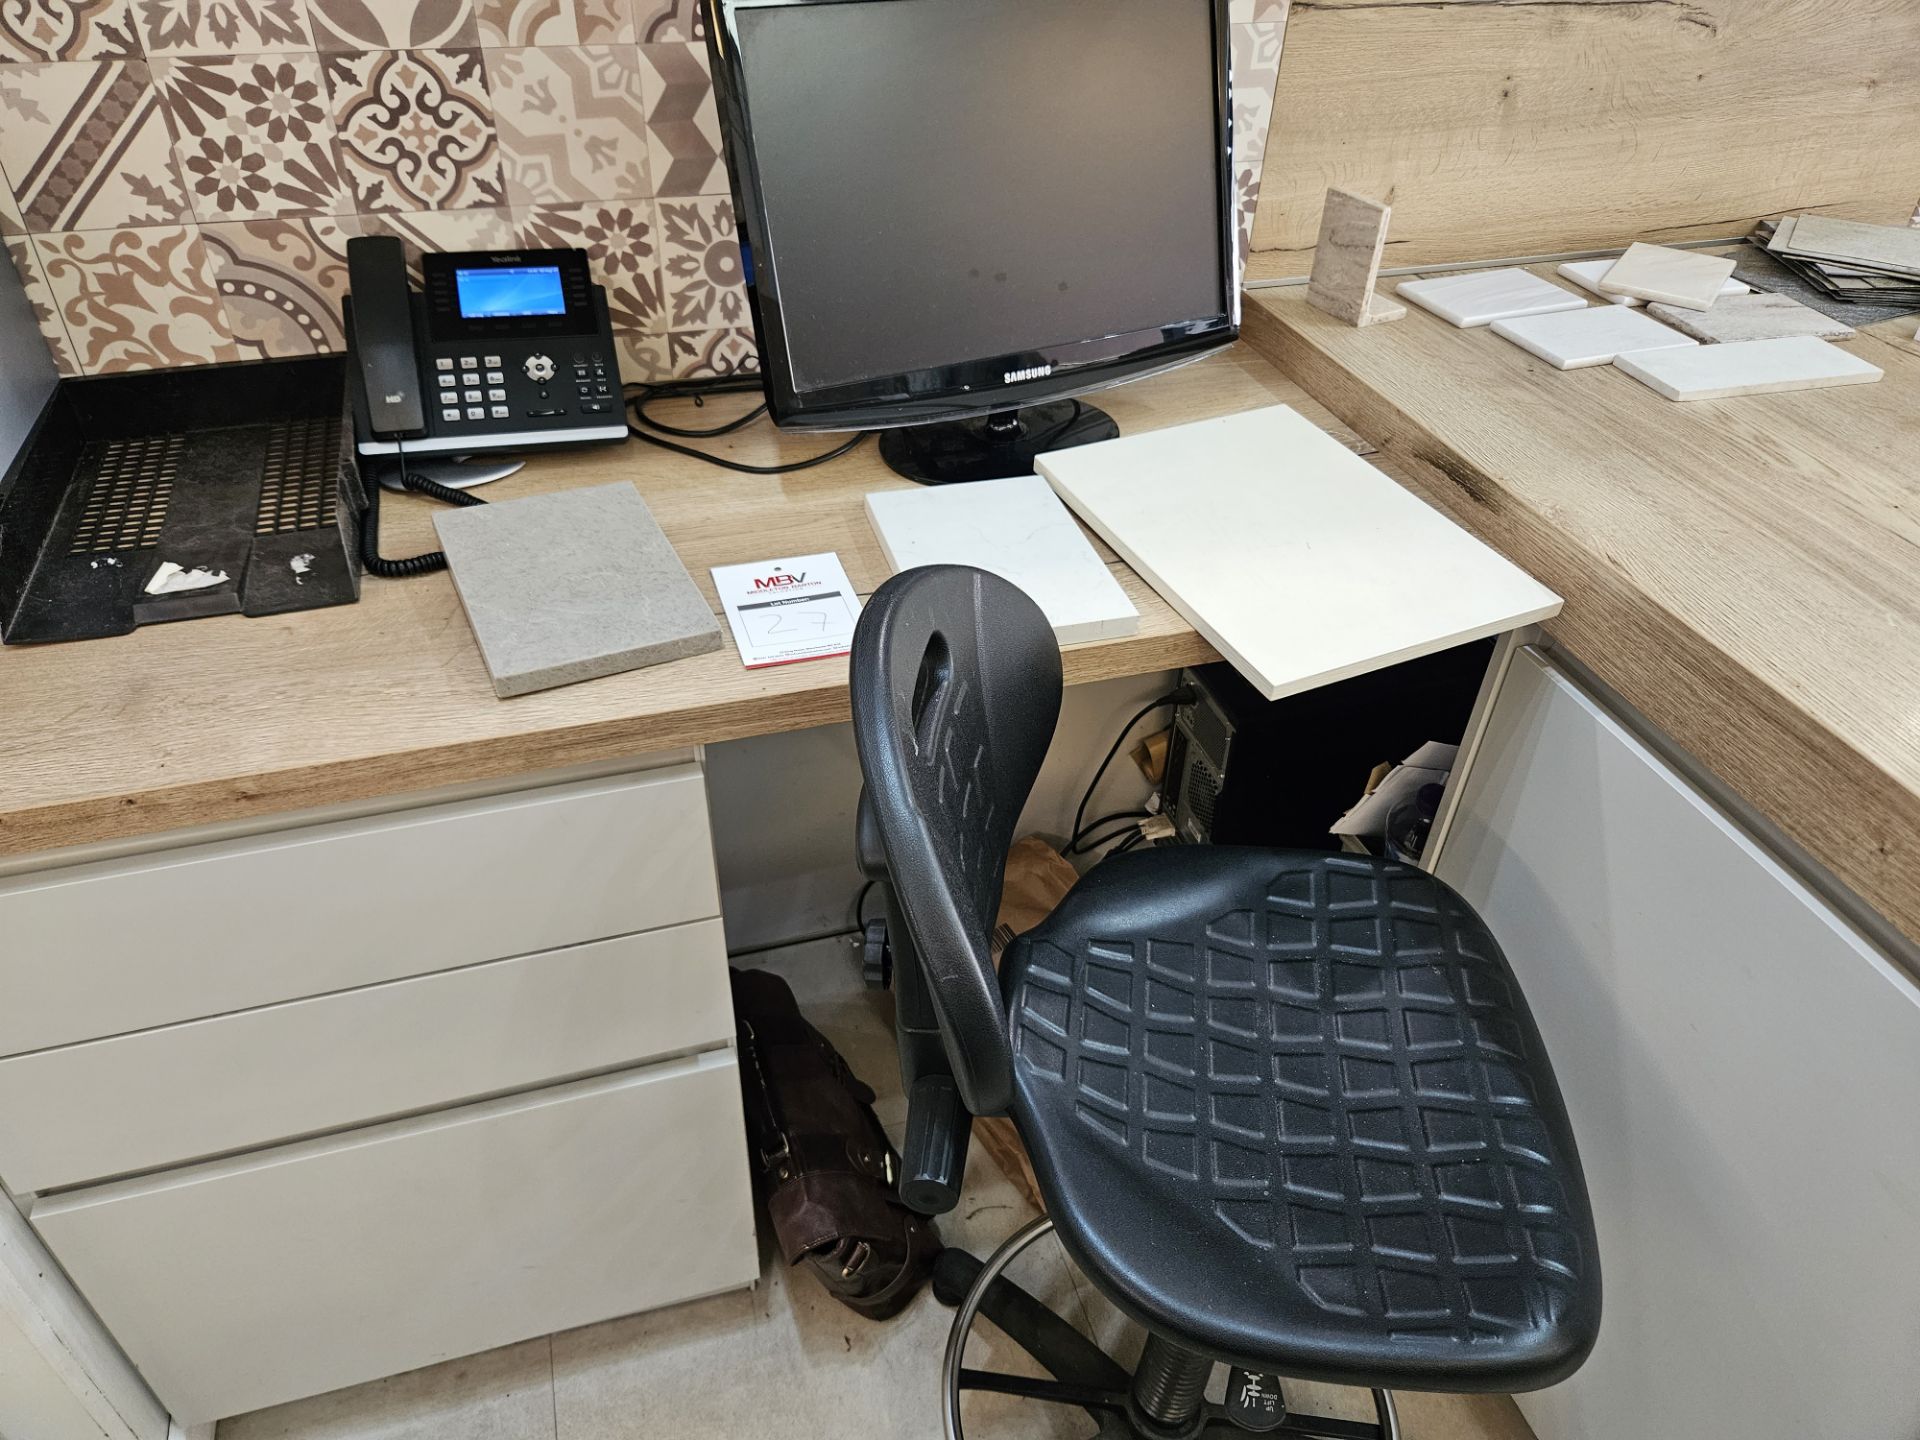 Fitted office unit comprising: desk with 3 drawers, return unit, Samsung monitor and swivel chair